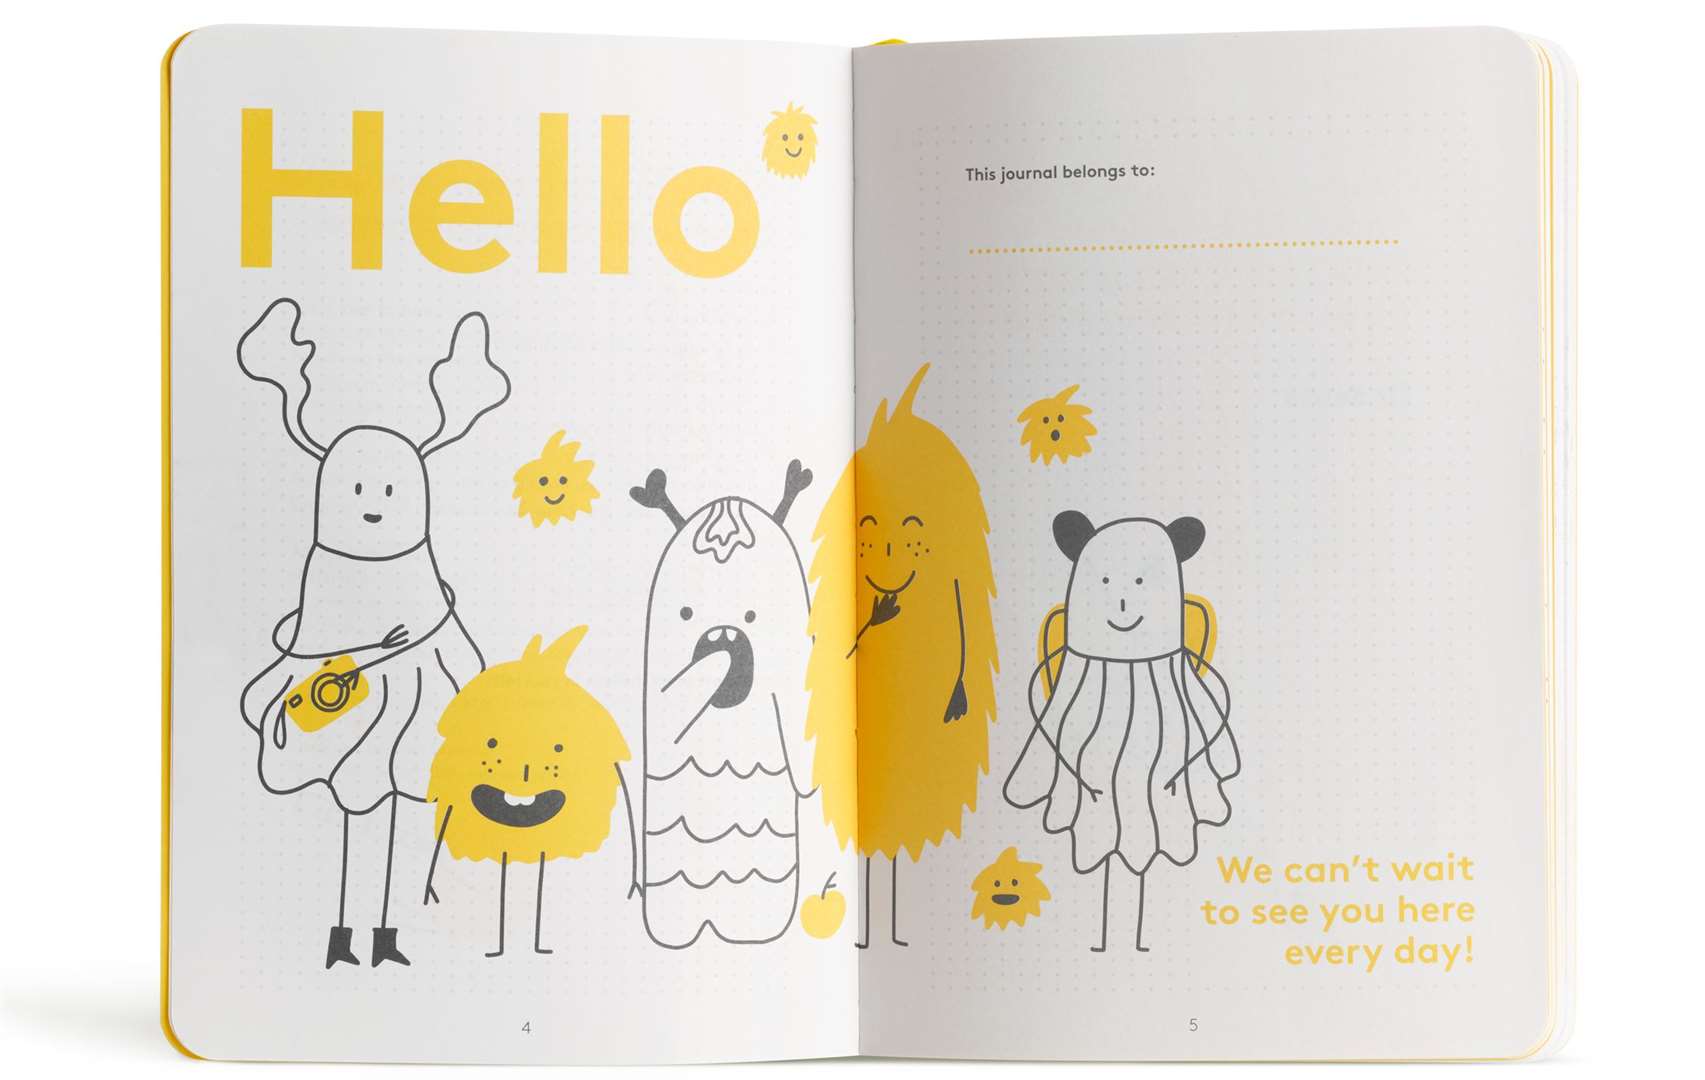 The journals encourage children to record and recognise kindness and gratitude in their life